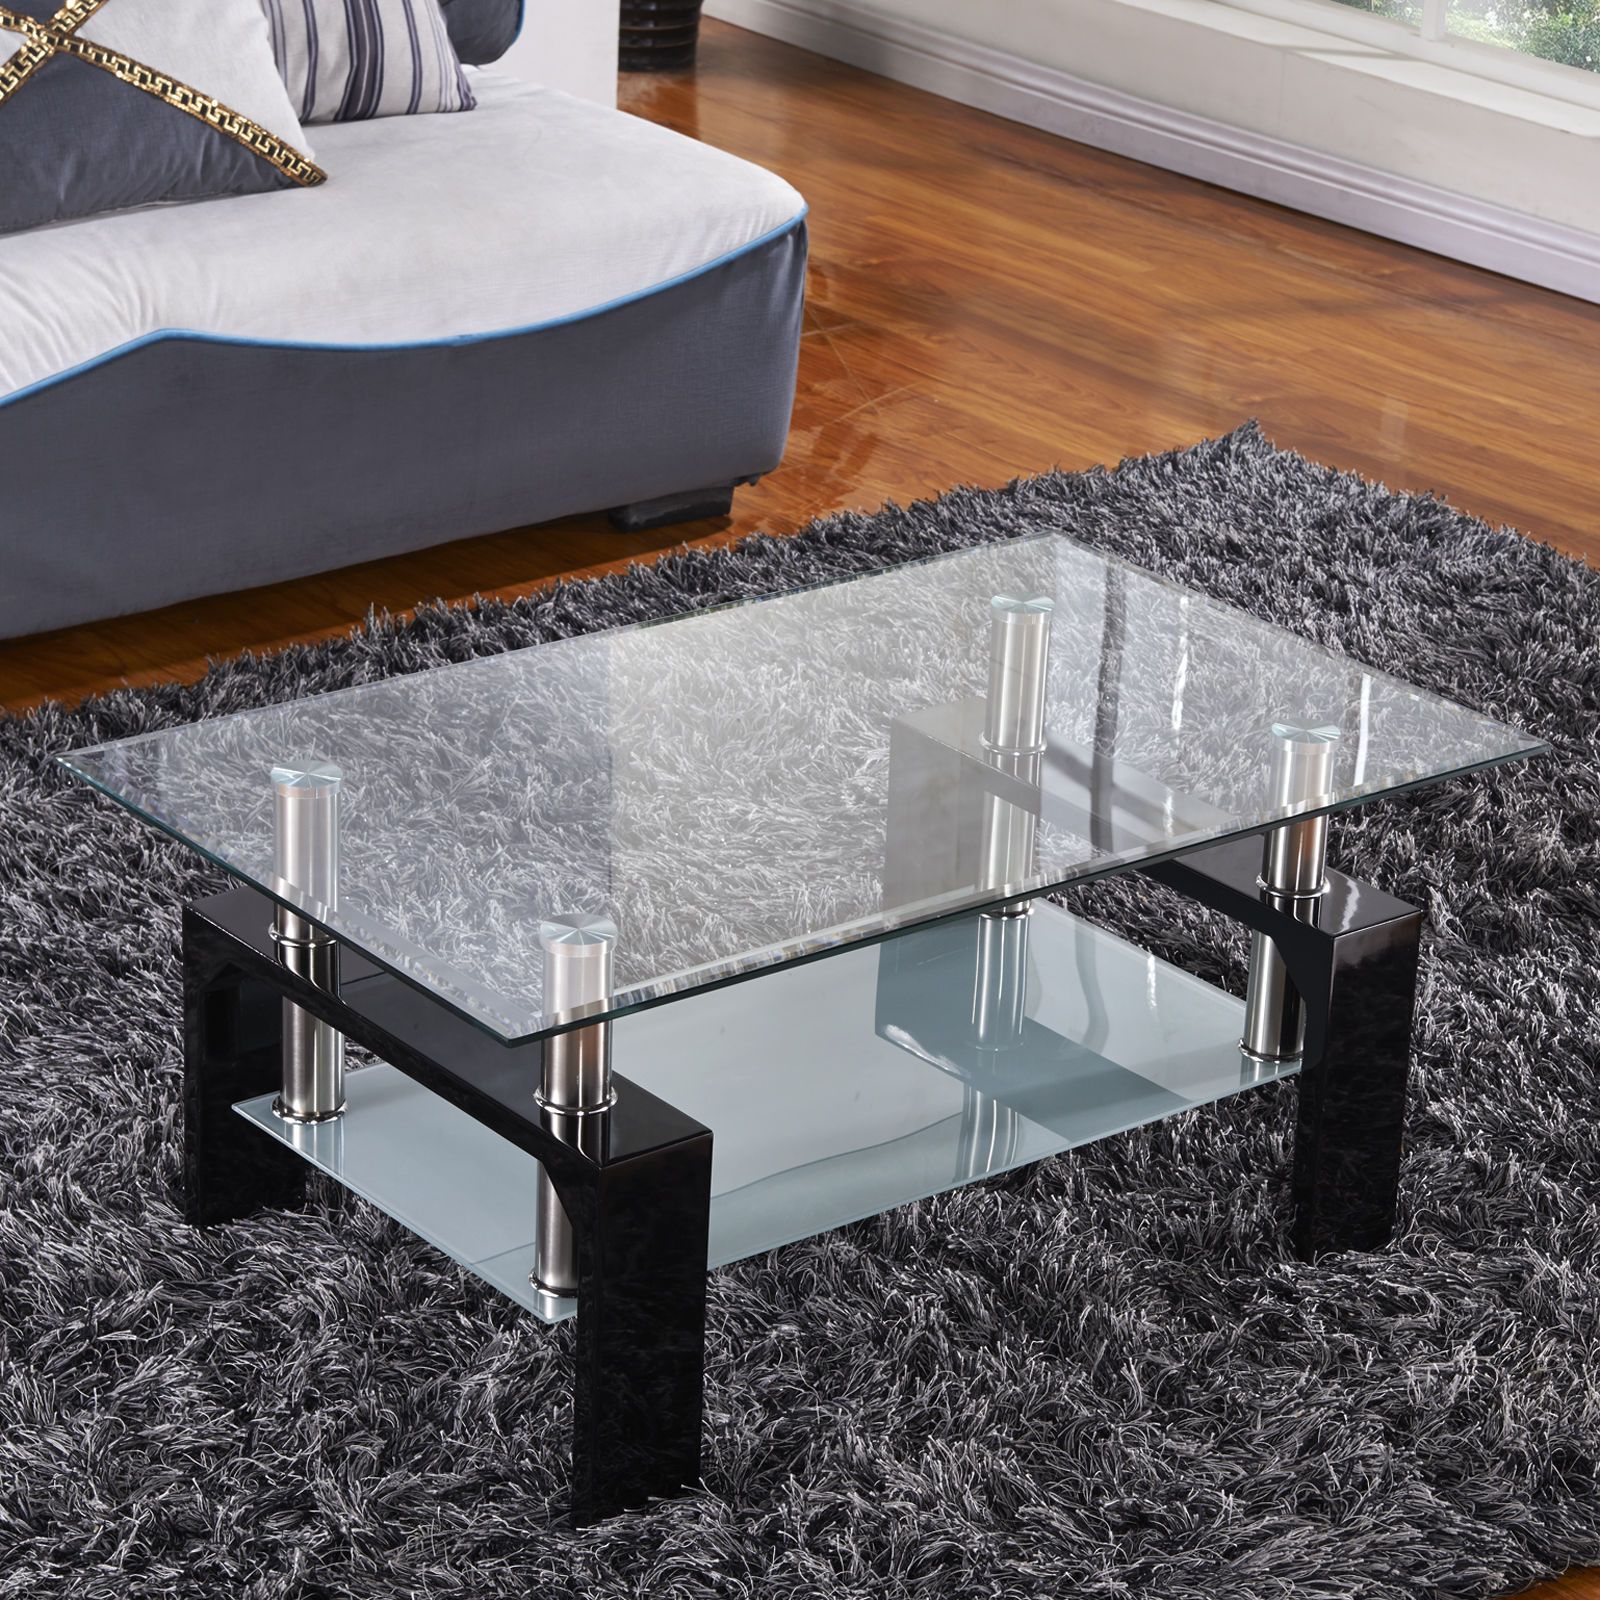 Design Glass Top Black Legs Coffee Table Rectangular In Chrome And Glass Rectangular Coffee Tables (View 5 of 15)